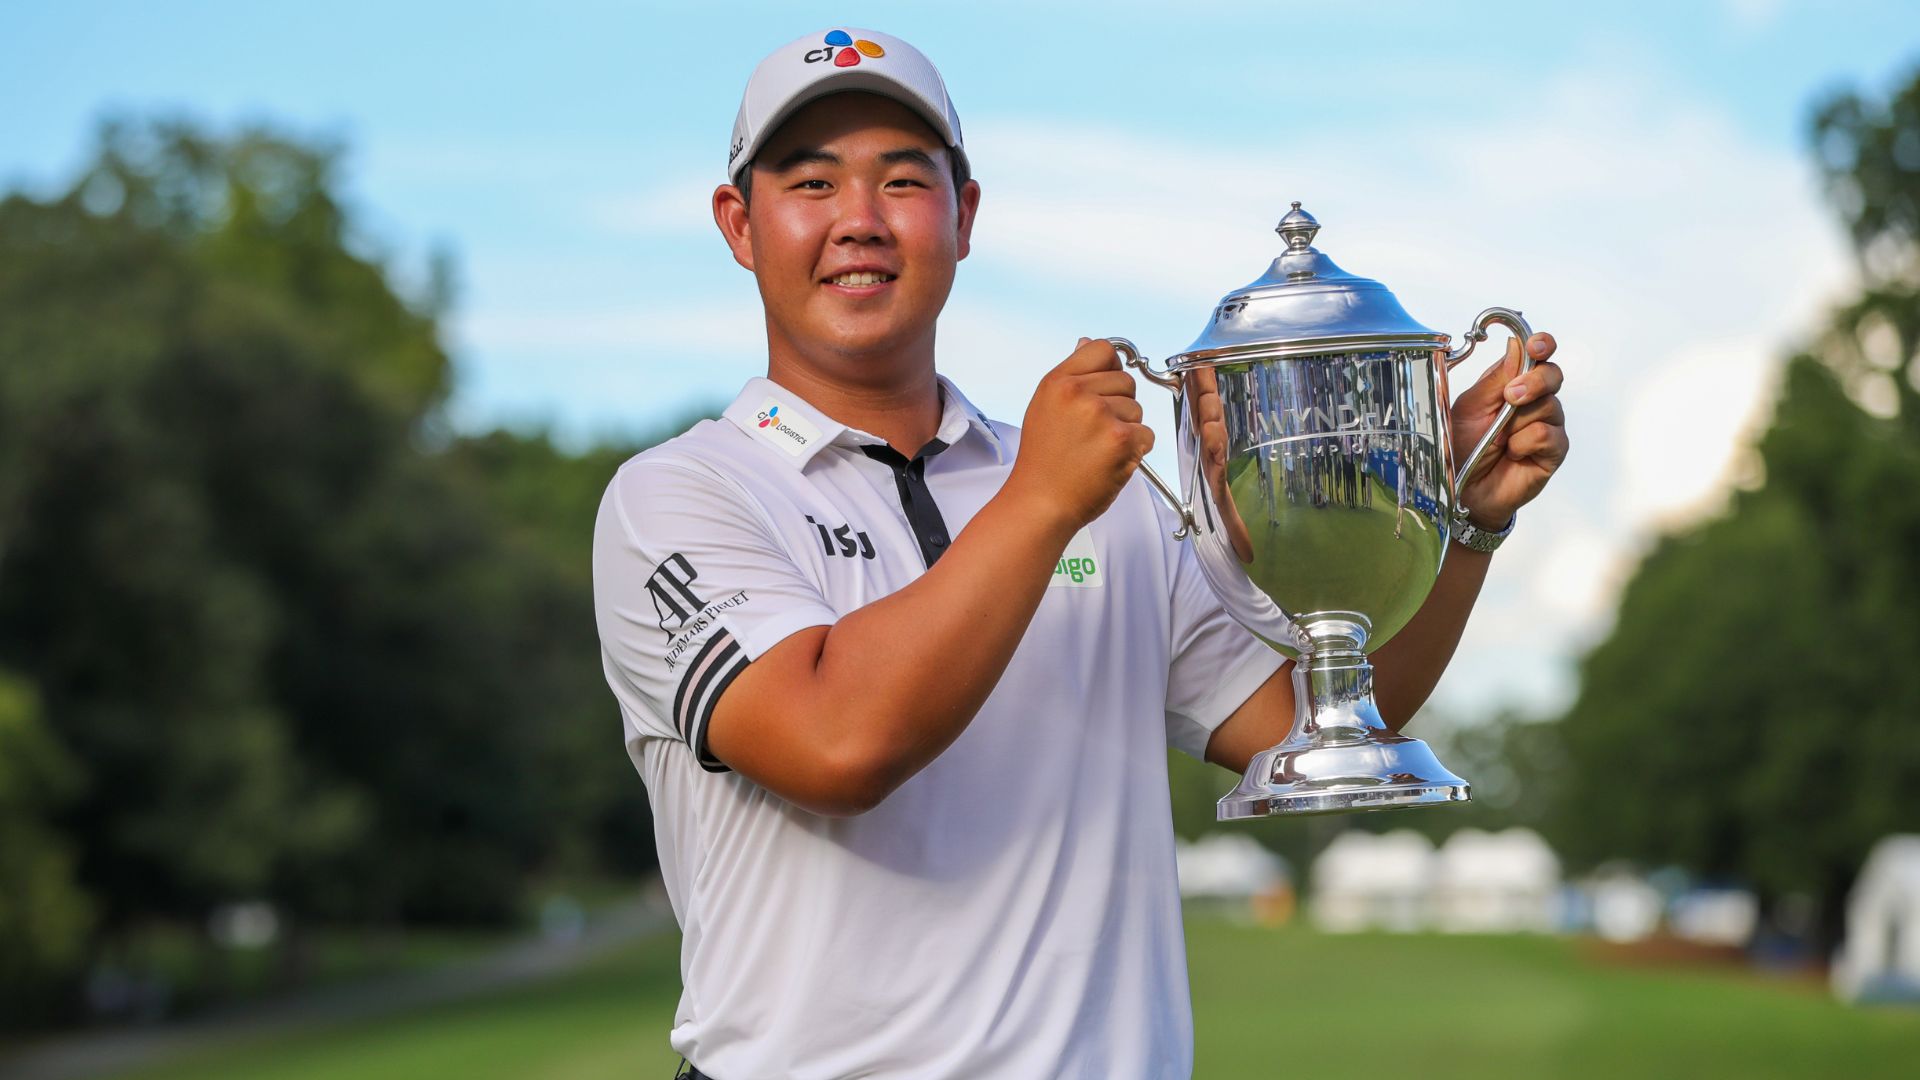 Tom Kim WDs from Wyndham Championship title defense with ankle injury